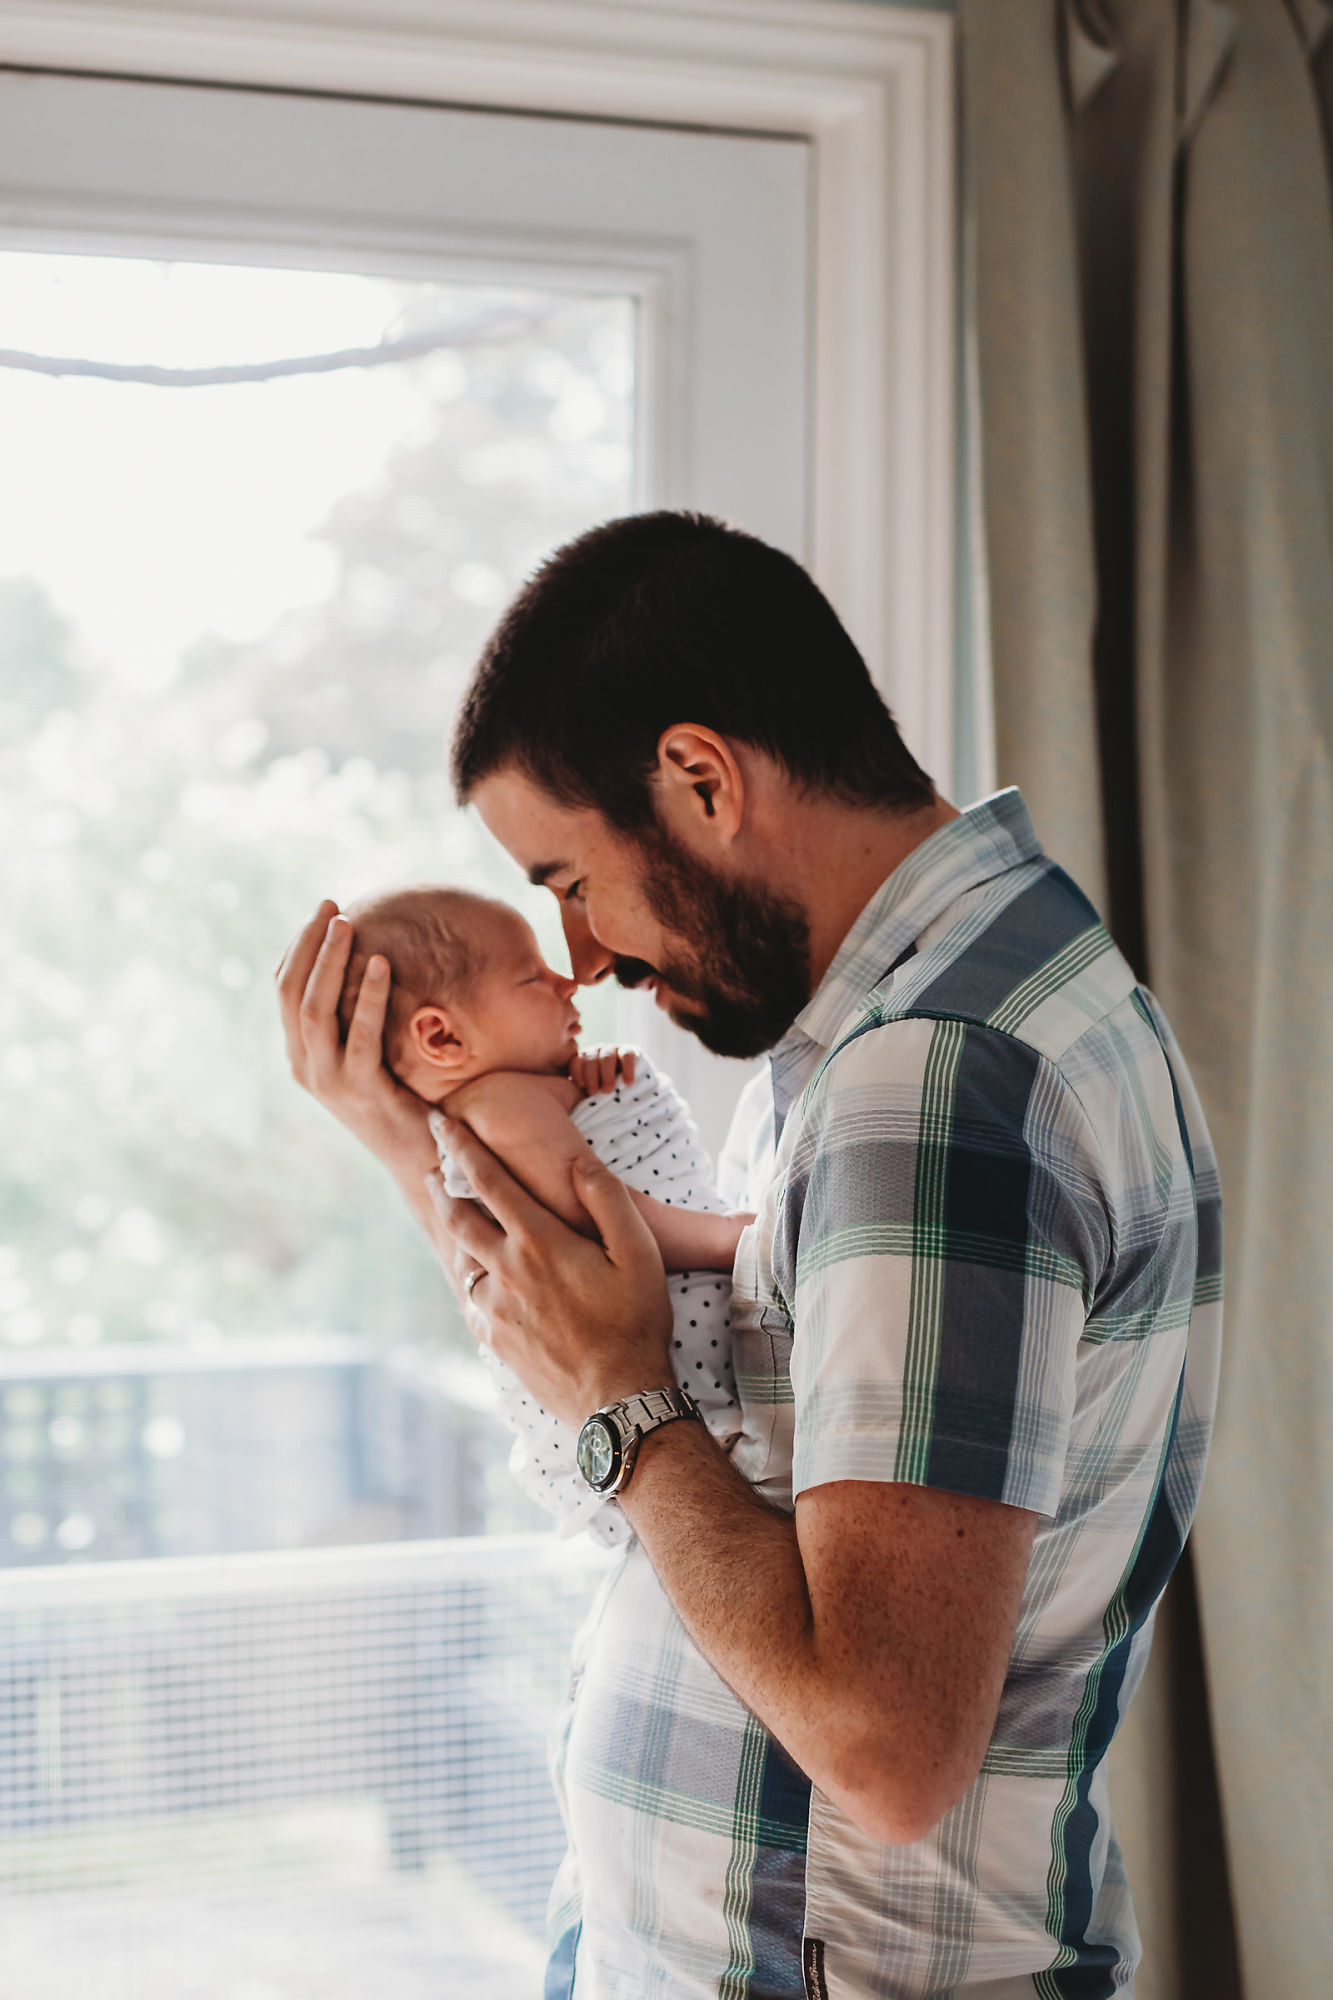 Dundas Newborn Photographer Jennifer Blaak captures a heartwarming moment between father and baby during their newborn and family lifestyle photography session at home in Hamilton.